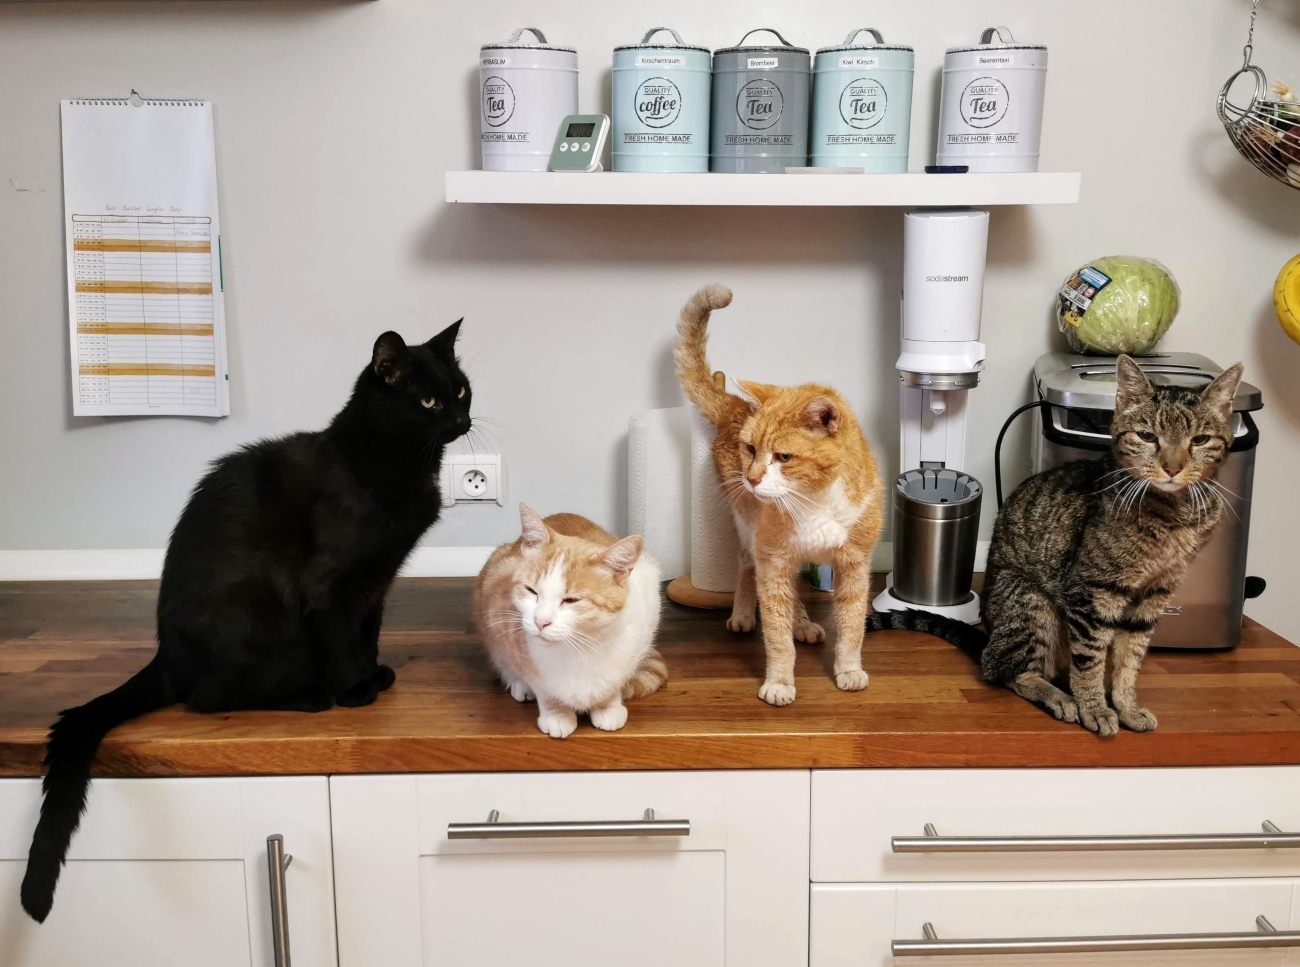 Top tips for living in a multi-cat household